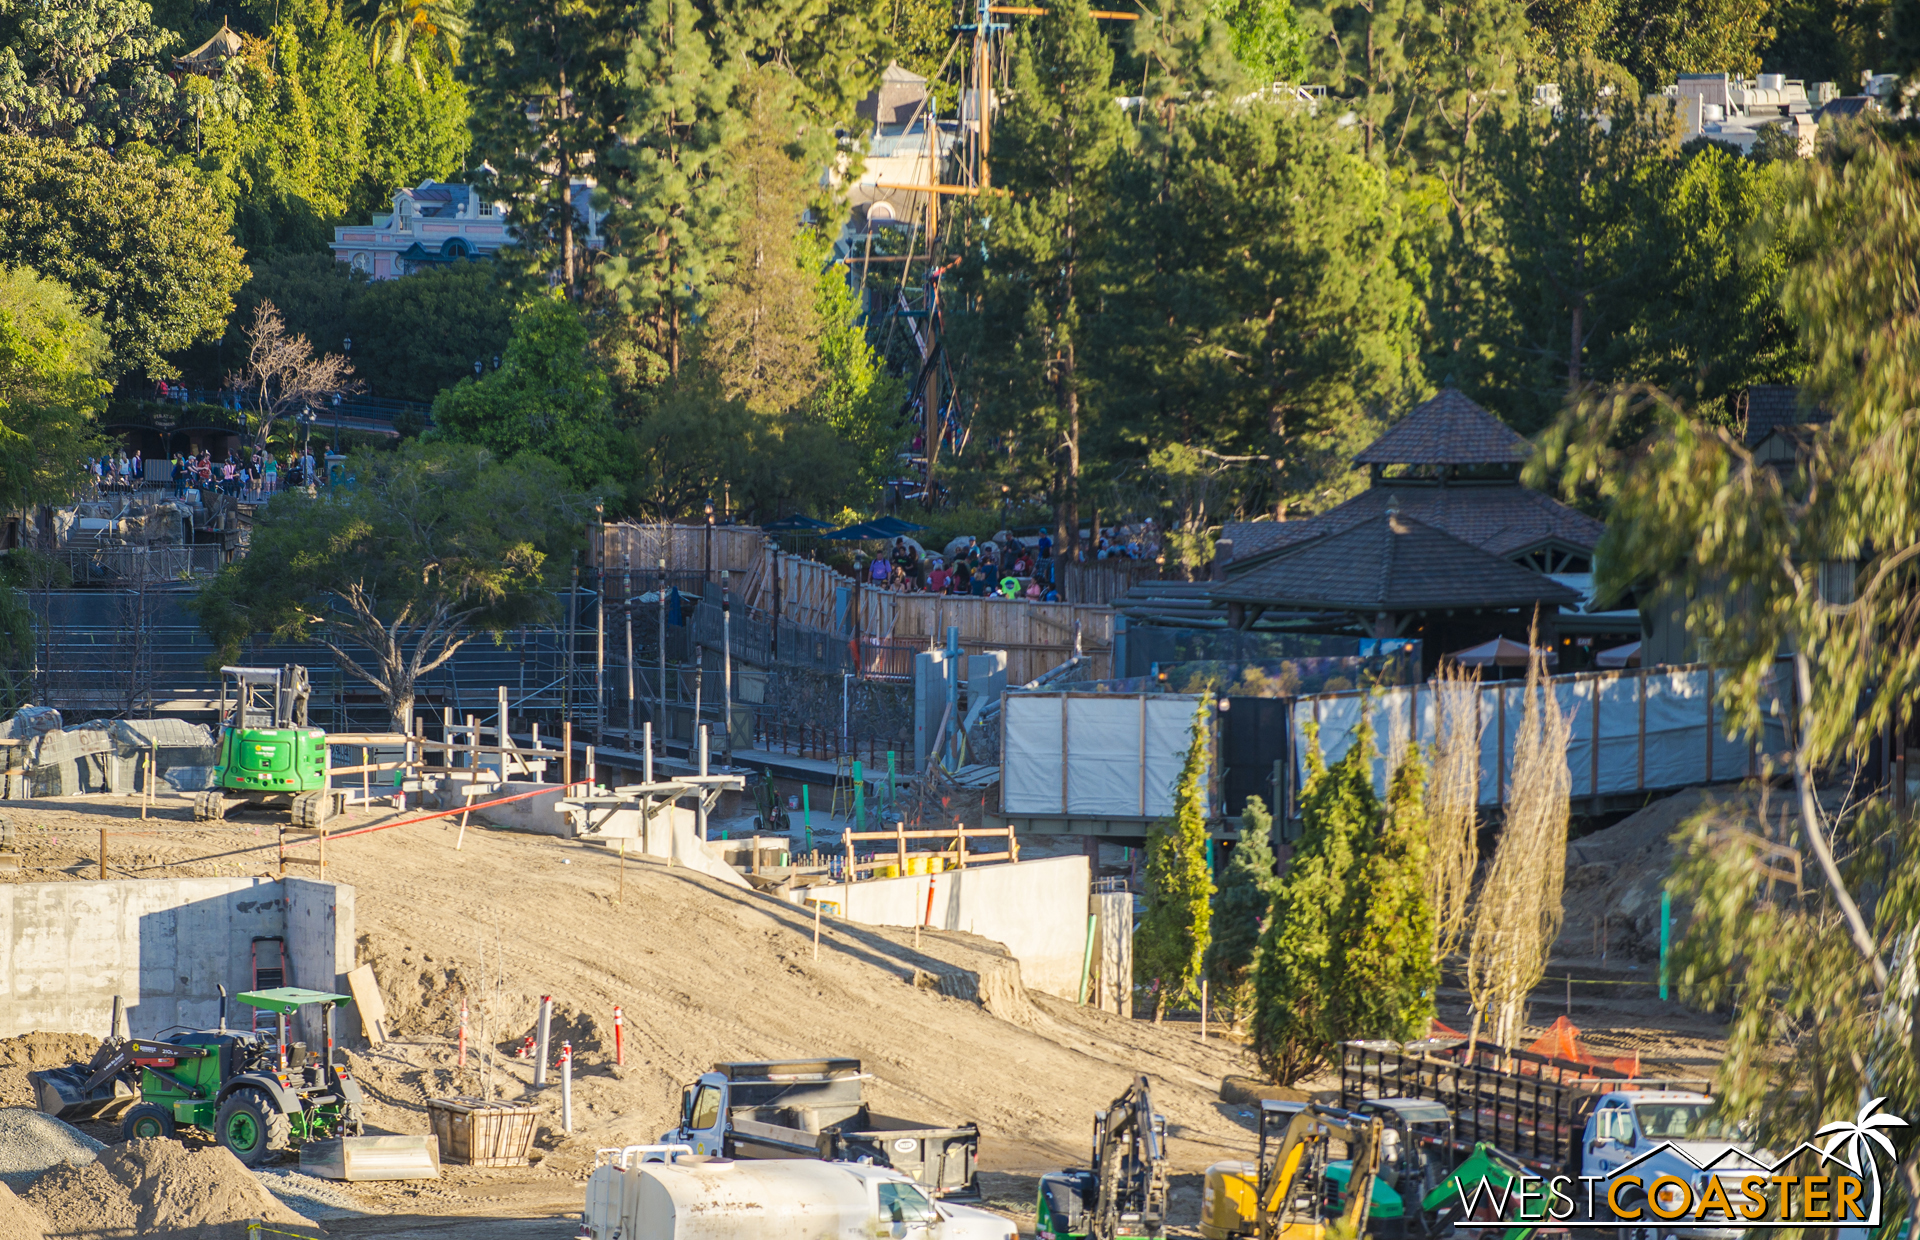  It would appear that the bridge/pathway to the left of the tarp that currently shields the view of Hungry Bear diners from the drained Rivers of America will slowly ramp down and then turn and duck below the railroad tracks before reappearing up and